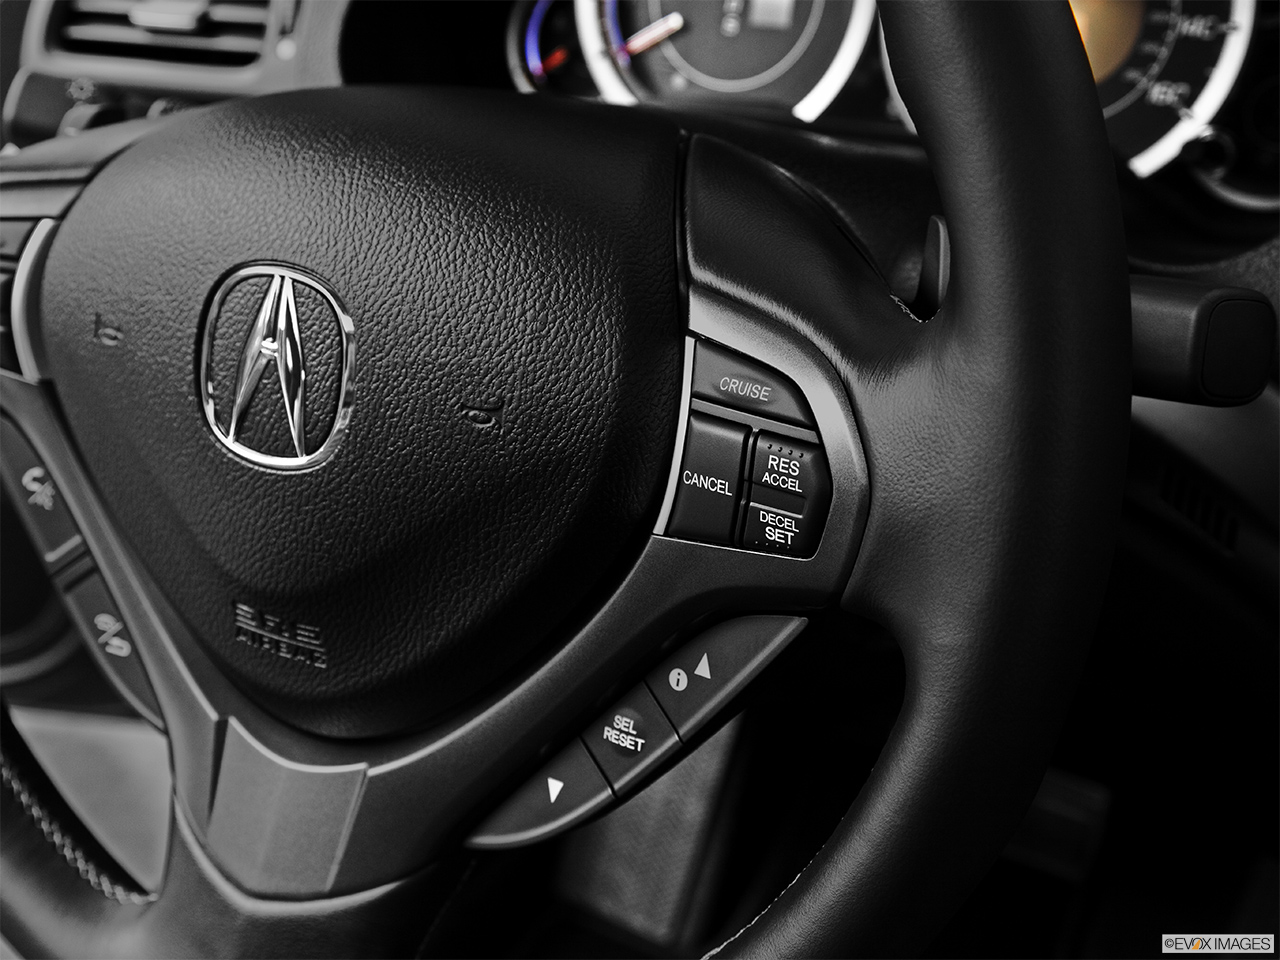 2014 Acura TSX 5-speed Automatic Steering Wheel Controls (Right Side) 